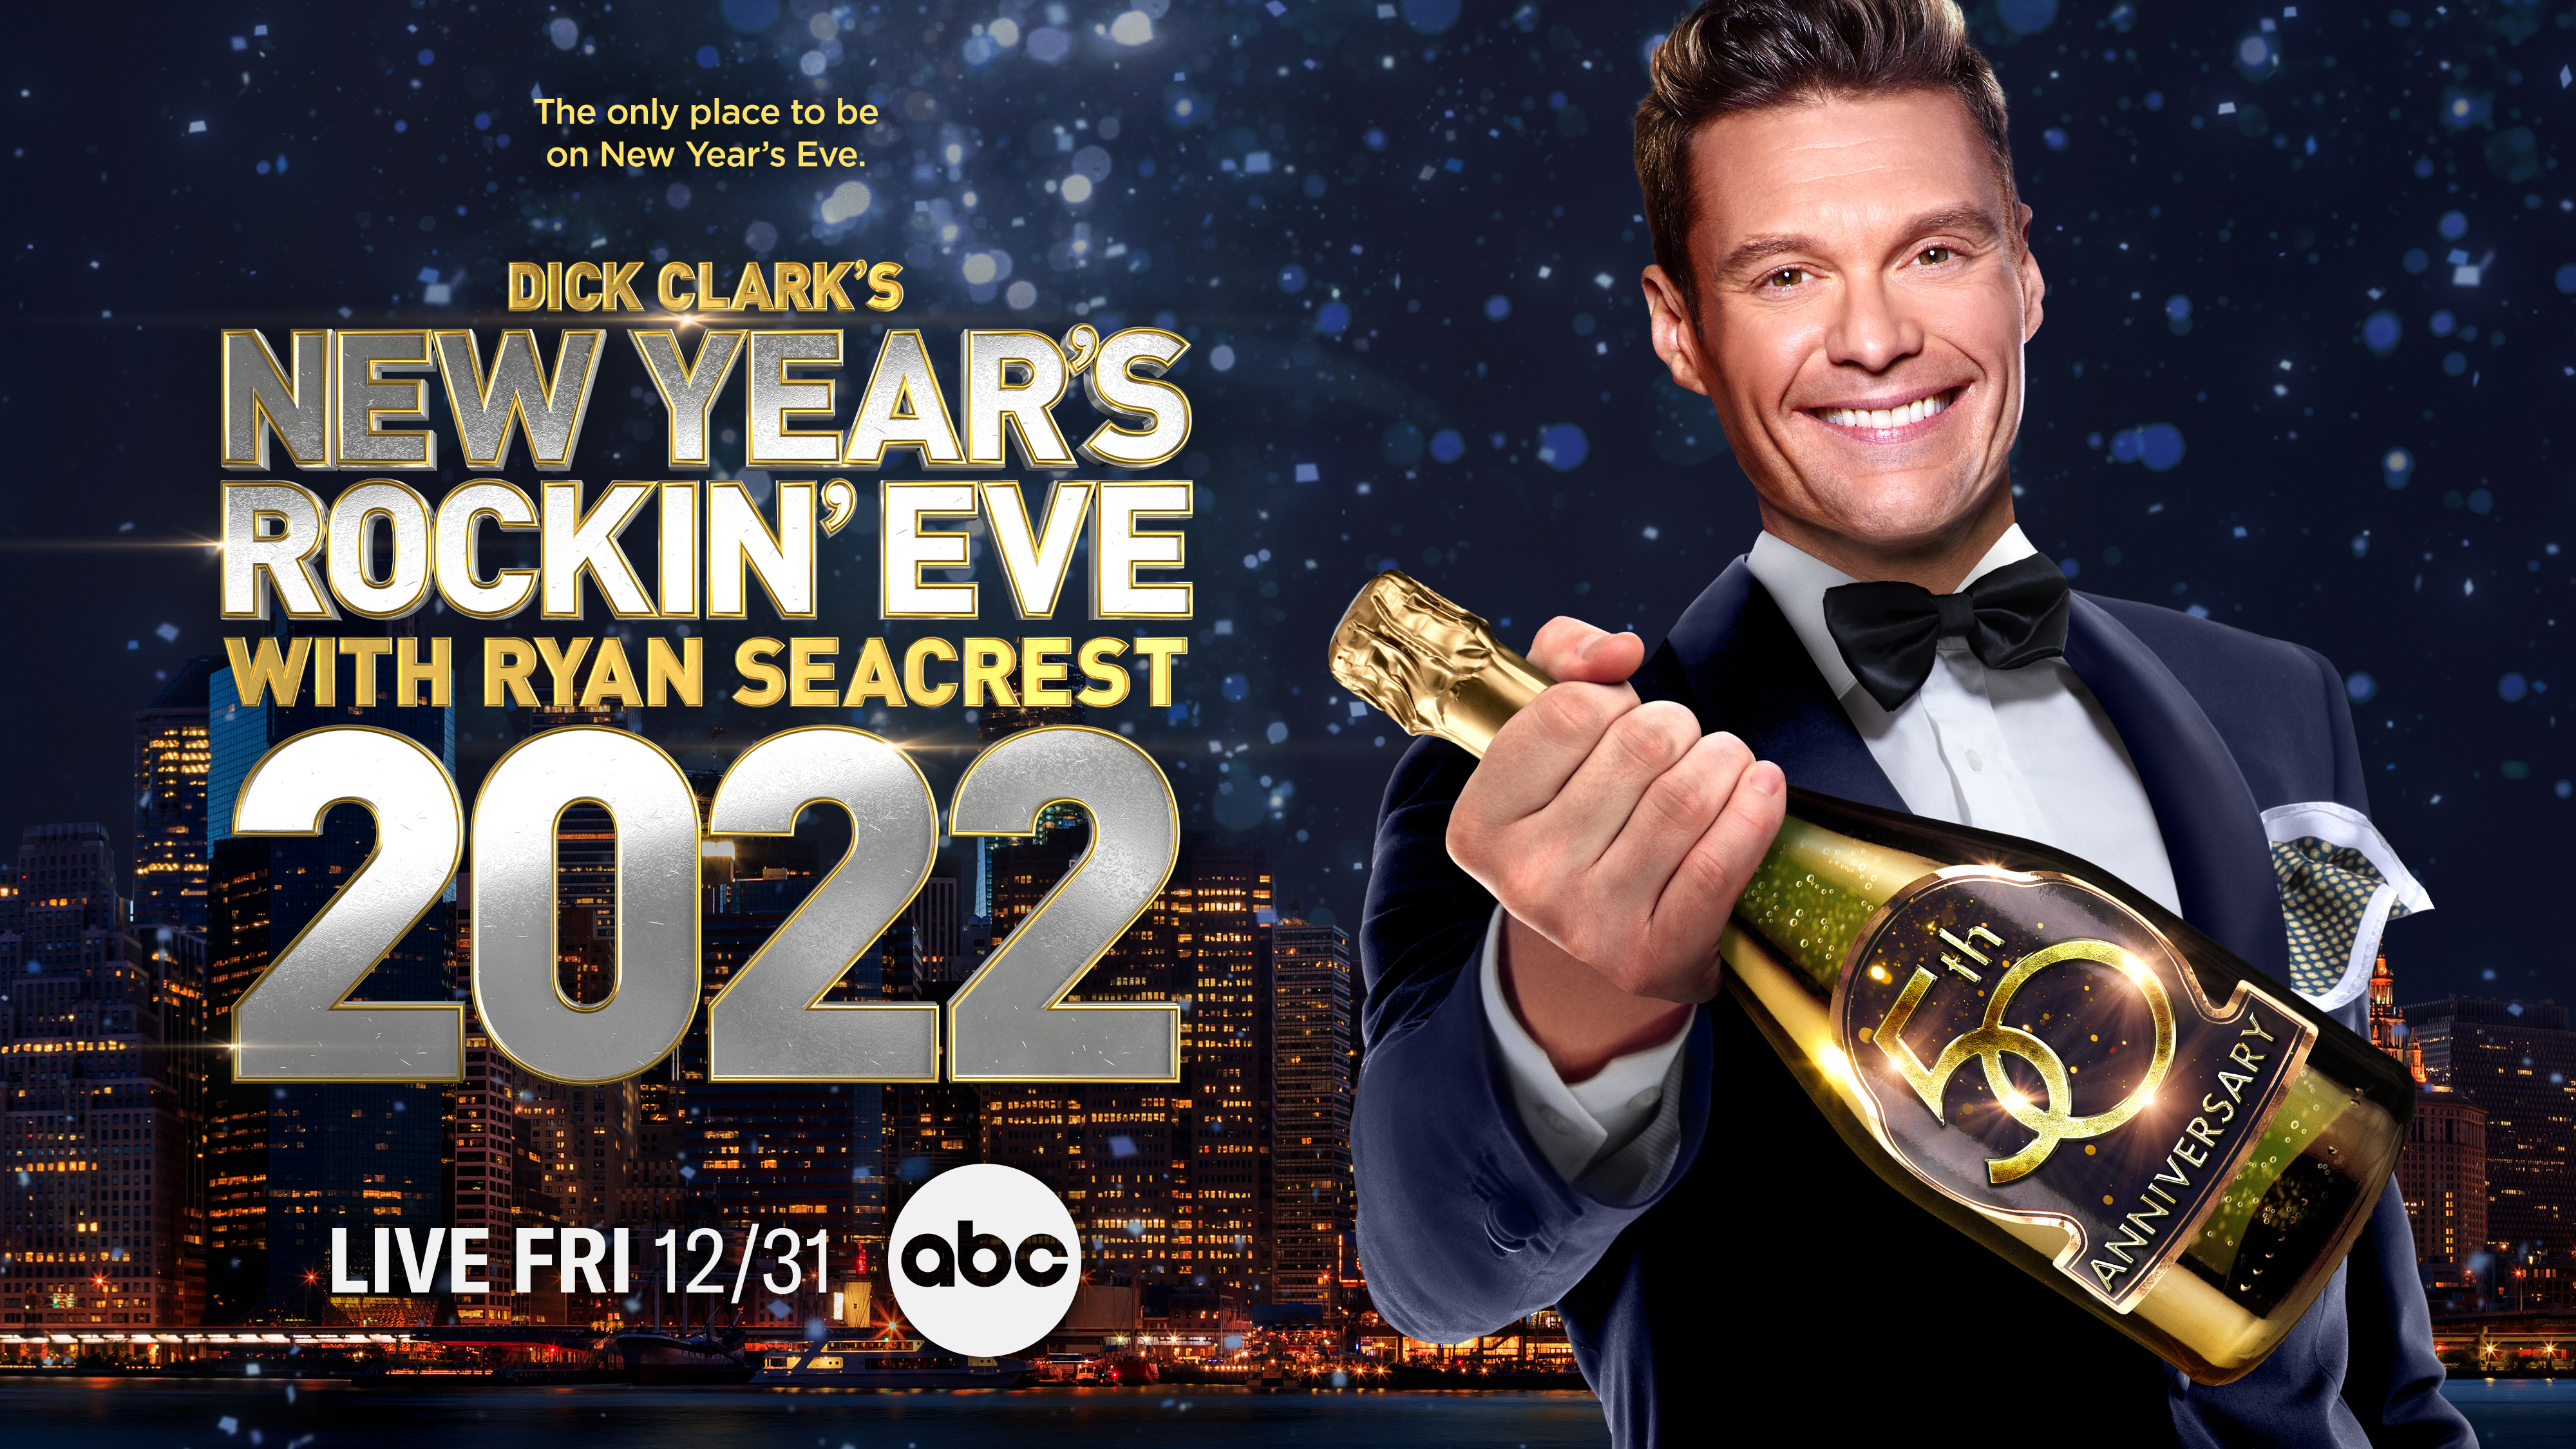 What channel is the dick clark new year's eve